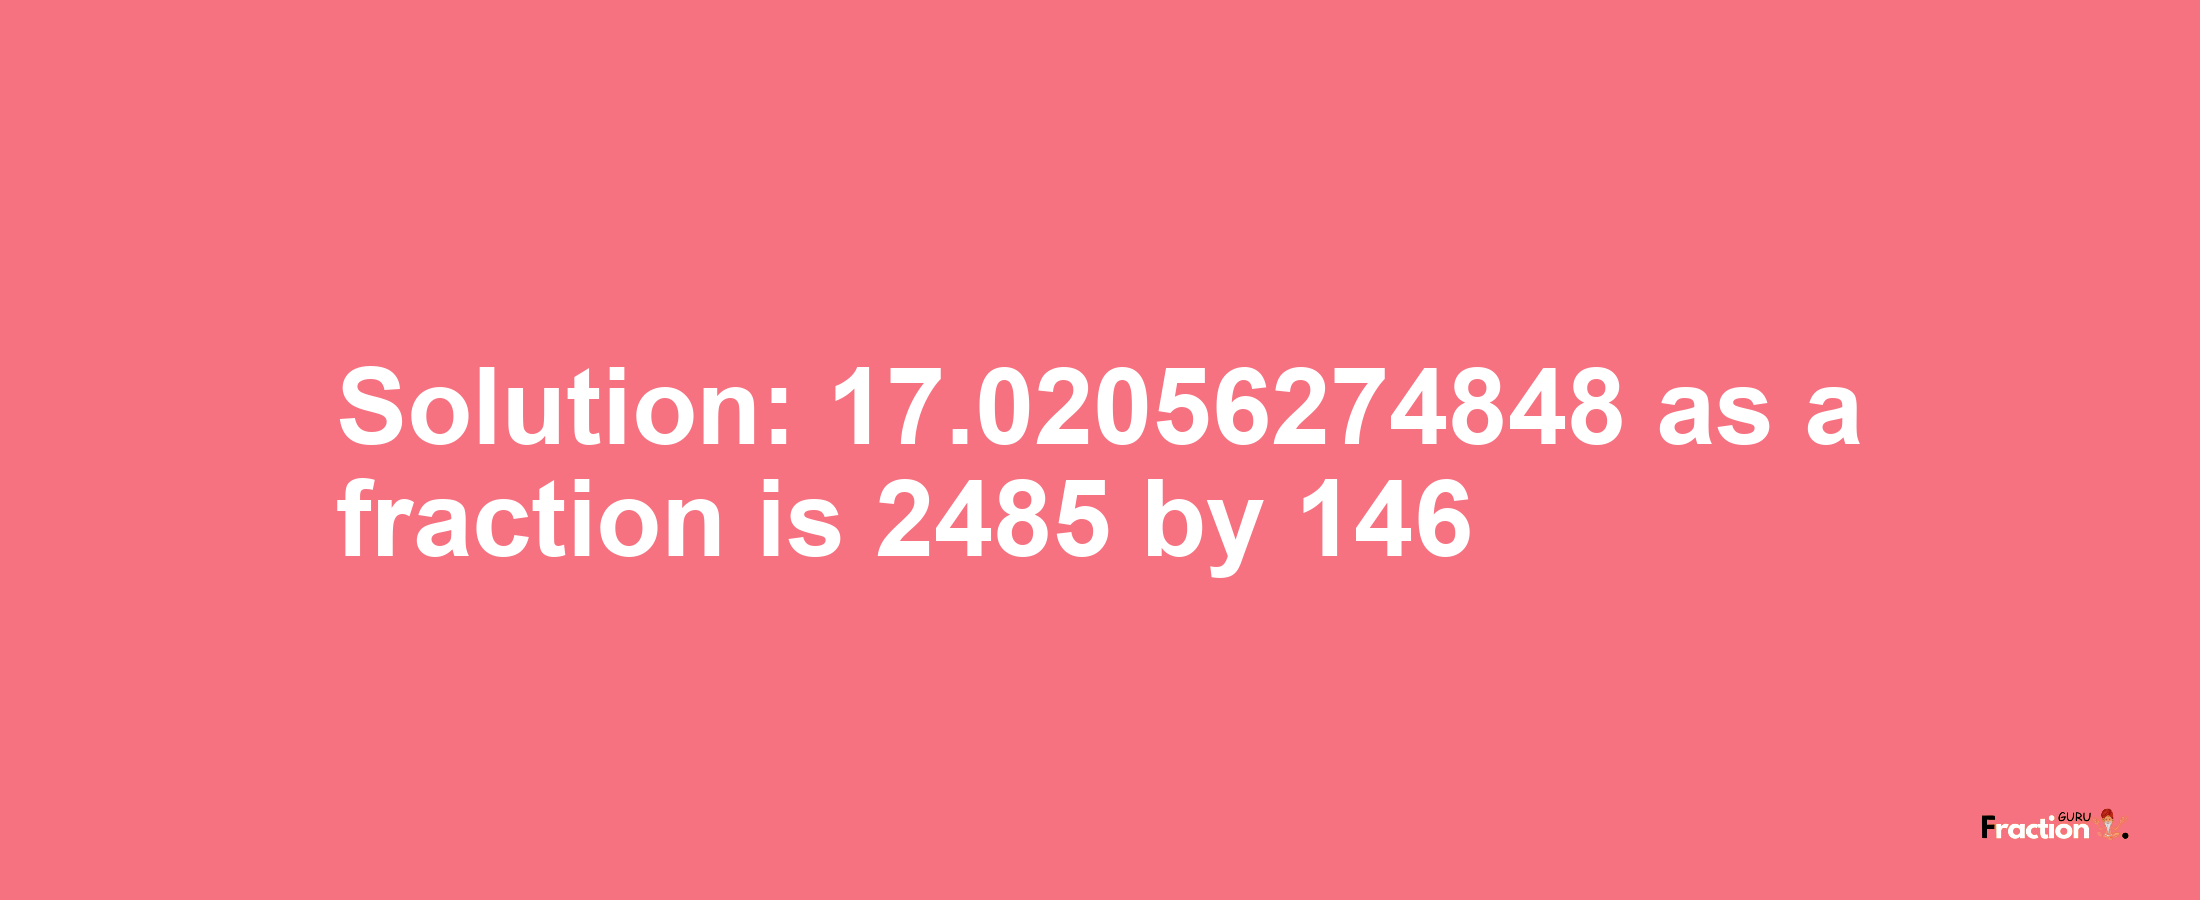 Solution:17.02056274848 as a fraction is 2485/146